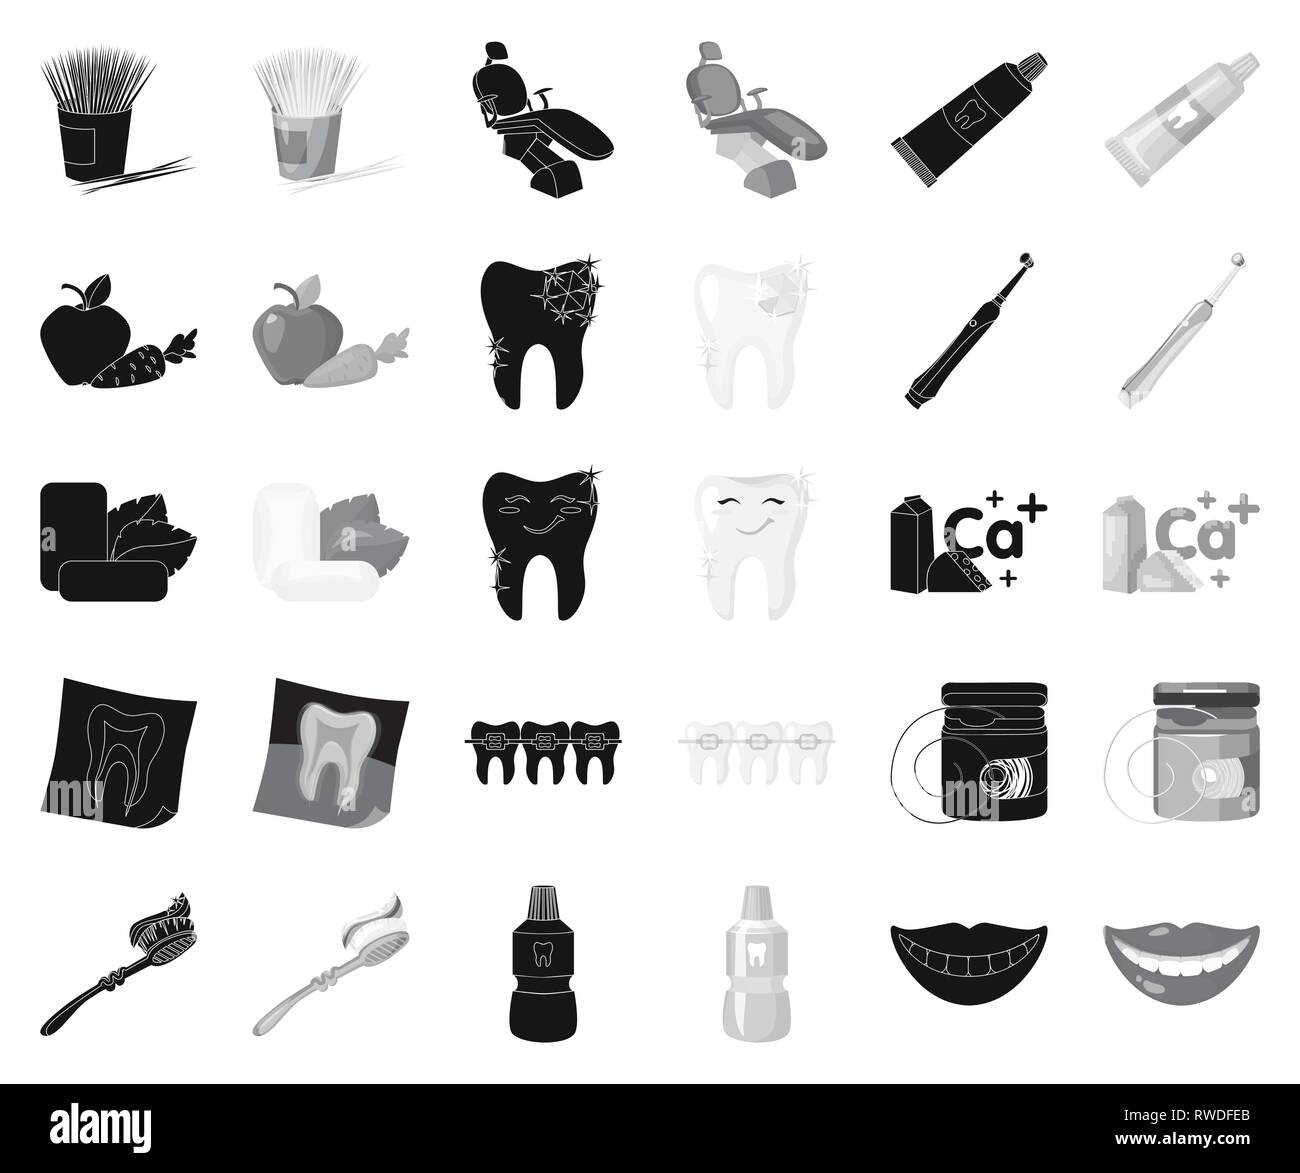 adaptation,apple,art,black,monochrome,bottle,braces,calcium,care,carrot,chair,chewing,clinic,collection,dental,dentist,dentistry,design,diamond,doctor,electric,equipment,floss,gum,hygiene,icon,illustration,instrument,isolated,logo,medicine,mouthwash,ray,set,sign,smile,smiling,sources,symbol,teeth,tooth,toothbrush,toothpaste,toothpick,treatment,vector,web,white,x Vector Vectors , Stock Vector